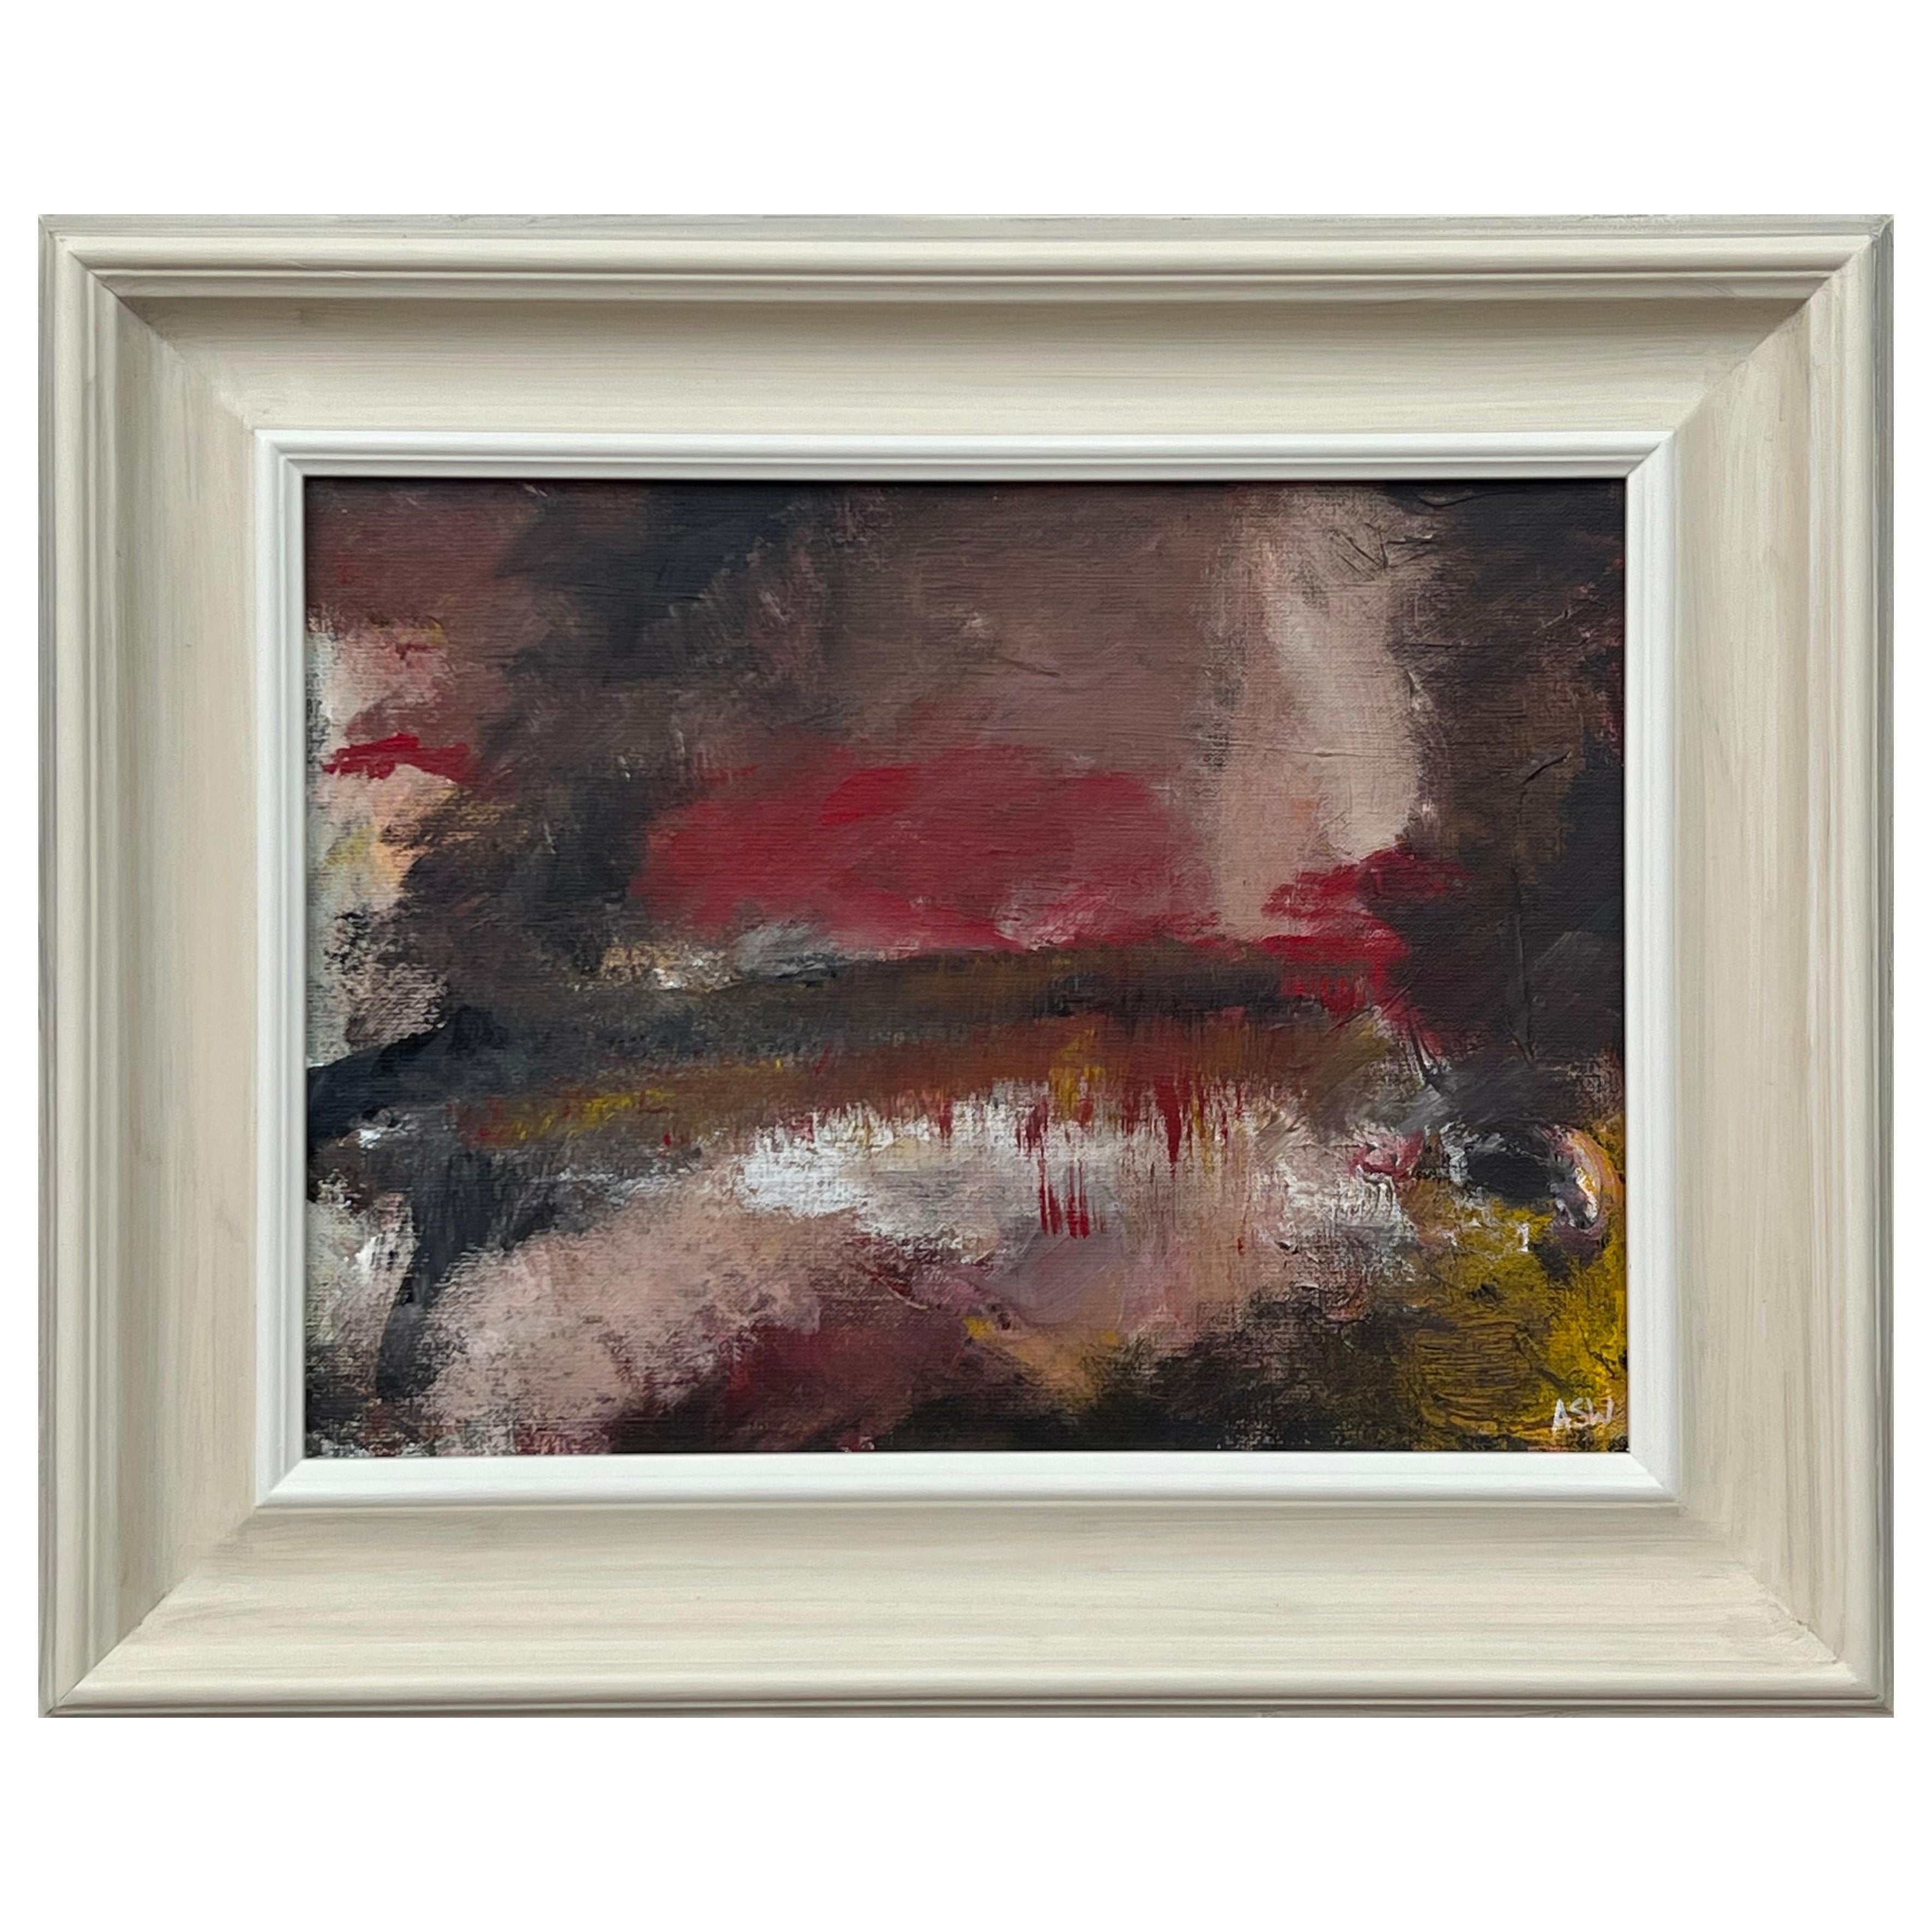 Angela Wakefield Landscape Painting - Dark Red & Black Expressive Abstract Painting by Contemporary British Artist